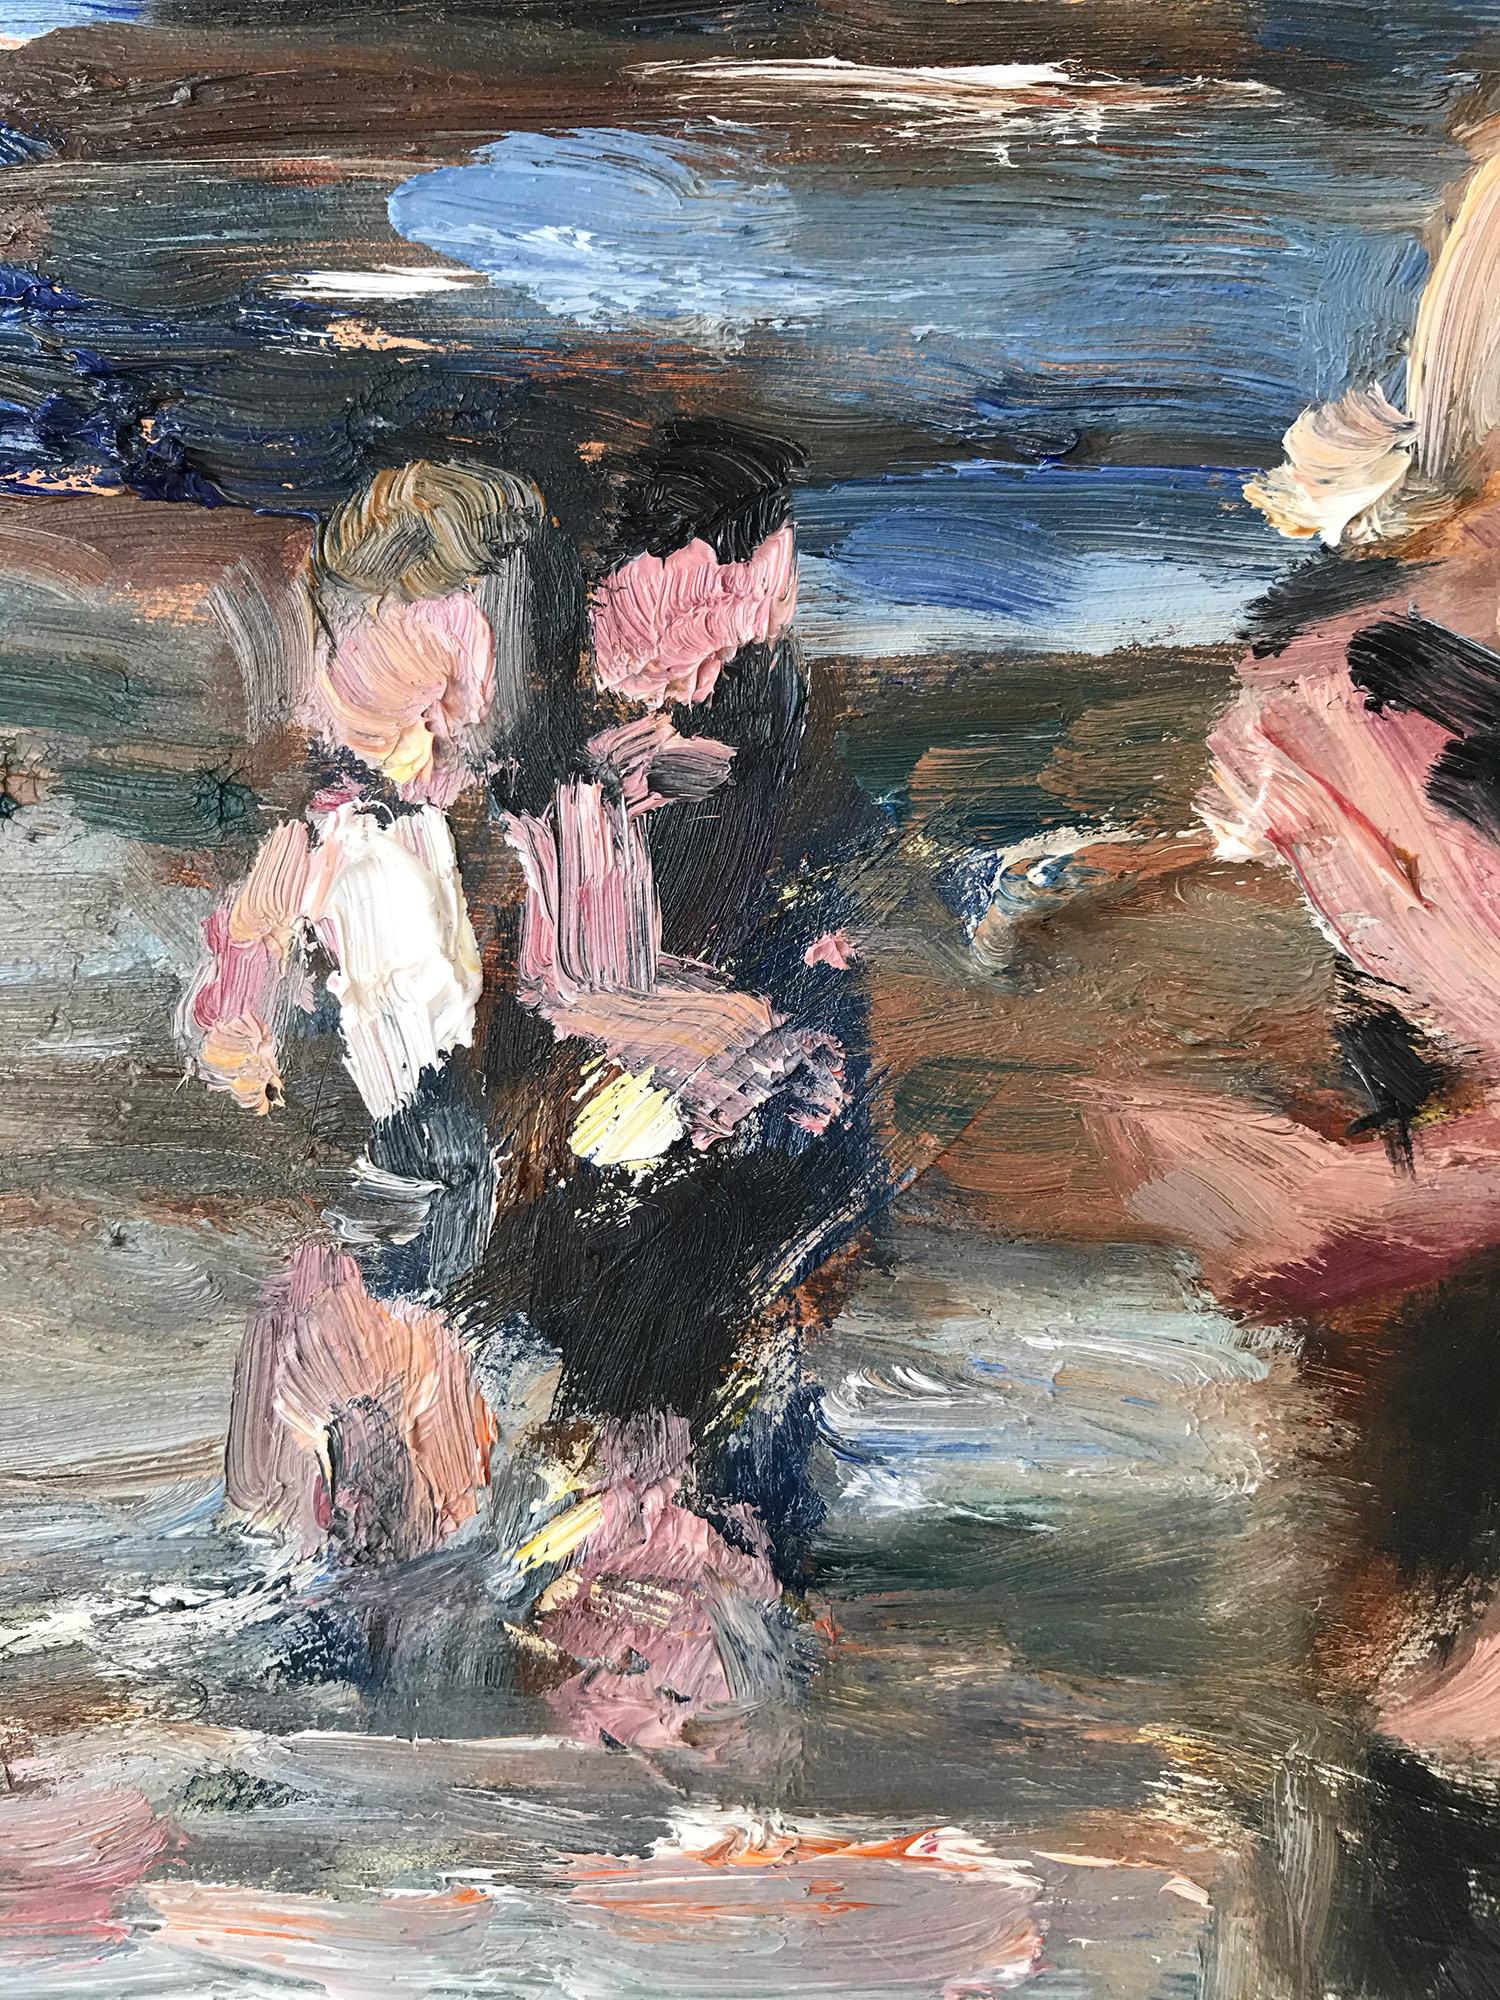 This painting depicts an impressionistic scene at the beach with beautiful brushwork and whimsical colors. The splashes and children playing are captrued with a nostalgia, as the colors vibrate with emotion. The work is a following of Edward